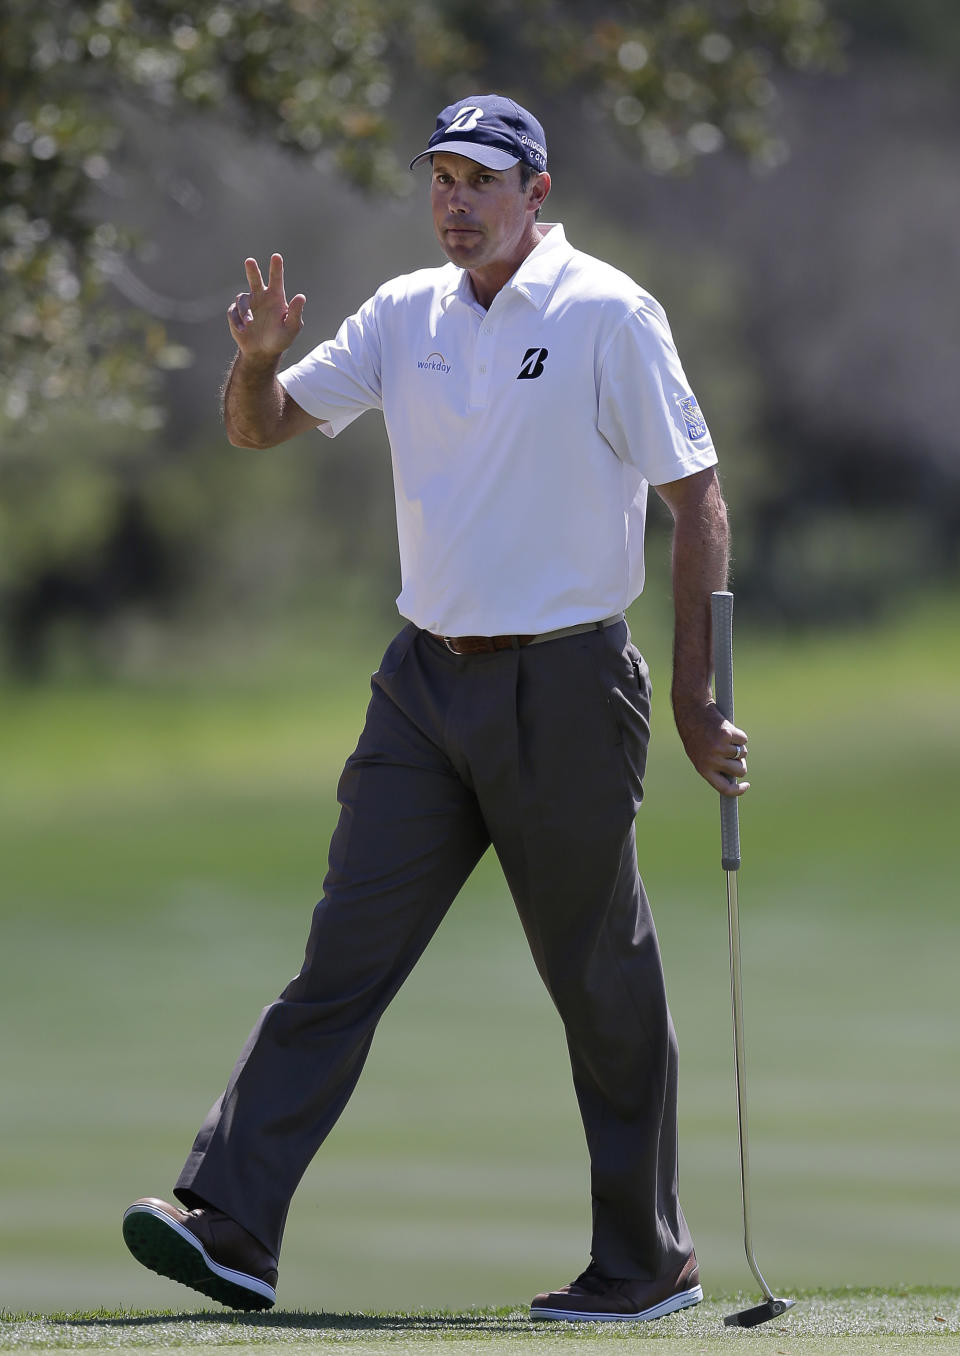 Matt Kuchar waves to fans after making a birdie putt on the eighth hole during the final round of the Texas Open golf tournament on Sunday, March 30, 2014, in San Antonio. (AP Photo/Eric Gay)